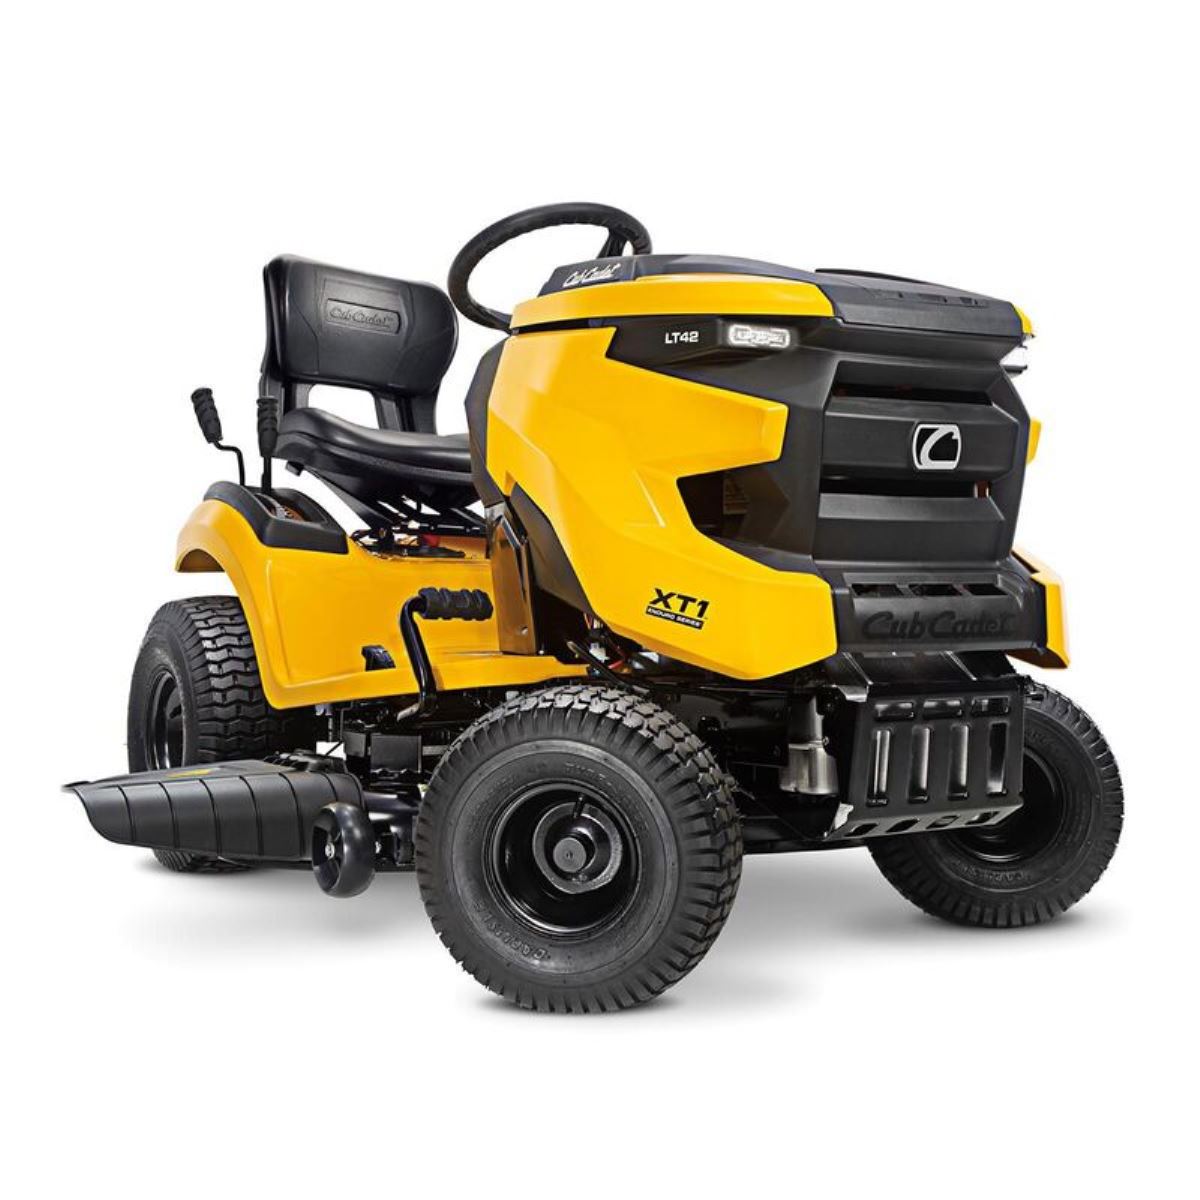 Cub Cadet XT1 T42 Ride On with Intellipower